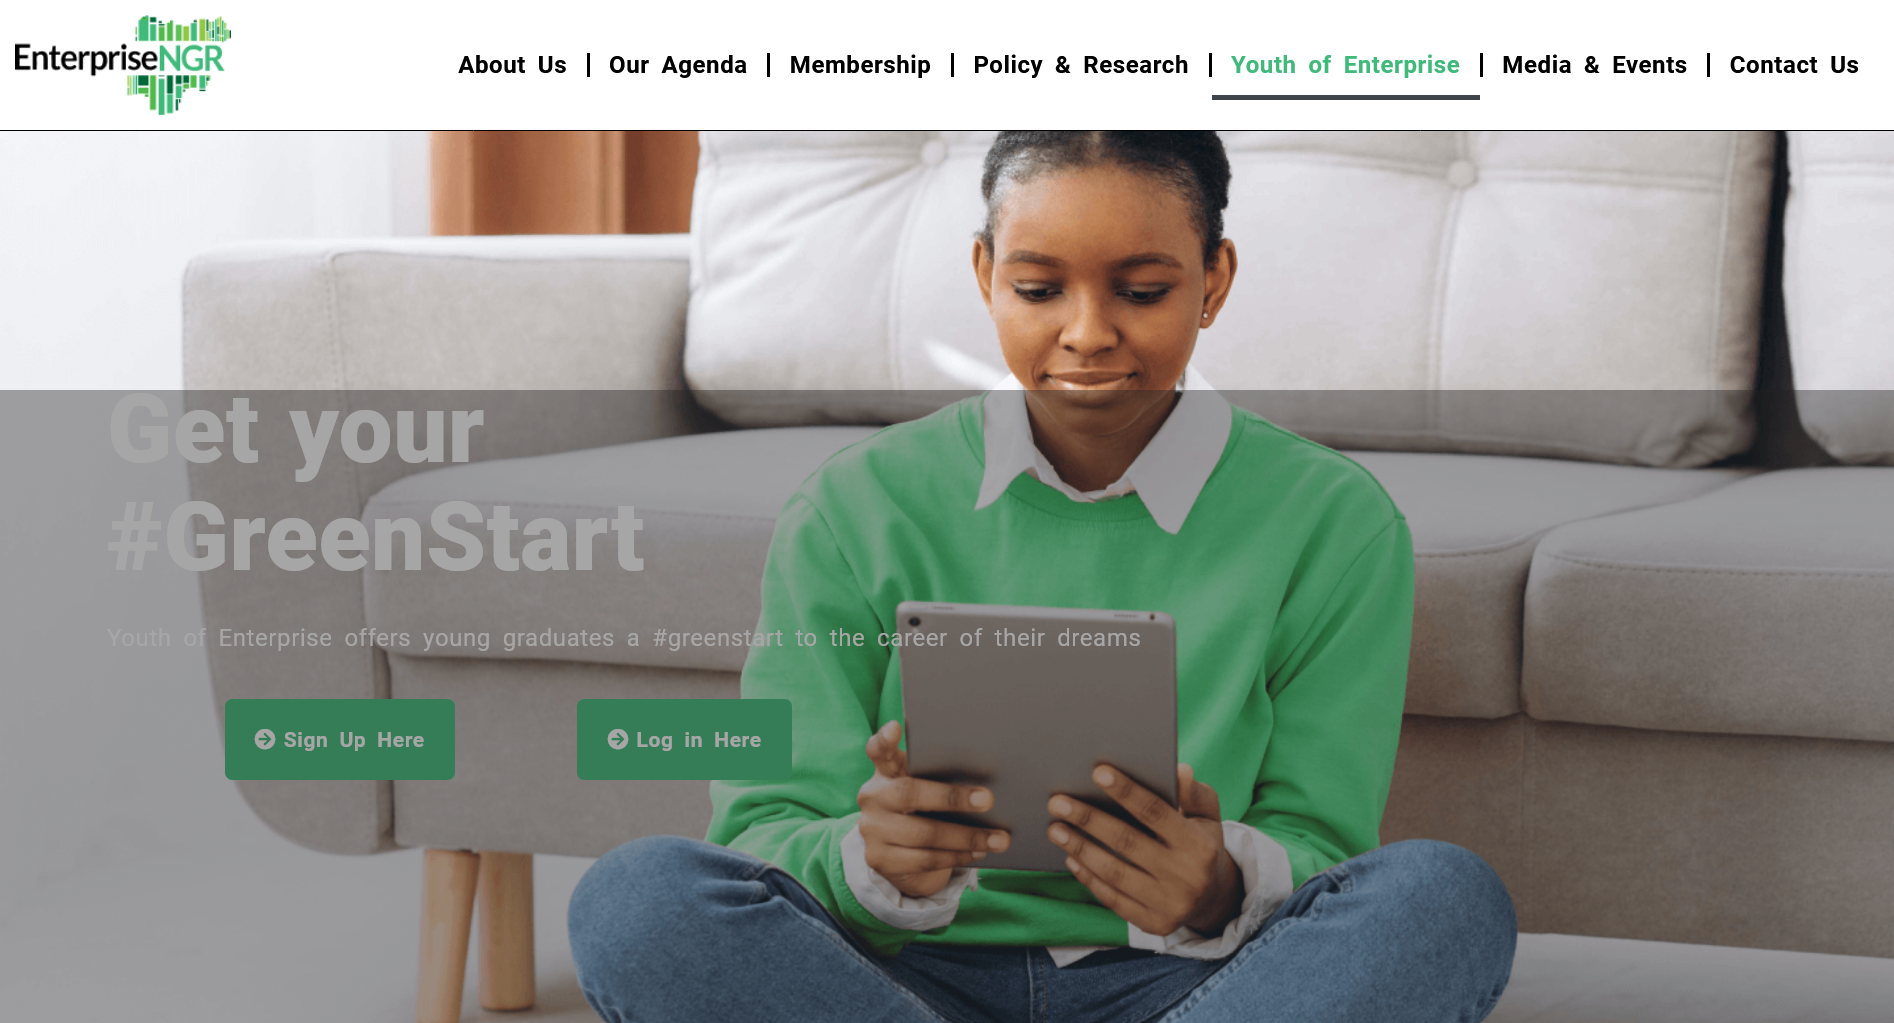 EnterpriseNGR Youth of Enterprise (YOE) Internship GreenStart Programme For Nigerian Graduates 2024 Applications are now being accepted for the PwC/EnterpriseNGR Youth of Enterprise's GreenStart Programme. This is an excellent opportunity for young Nigerians to develop their skills and gain valuable experience in the private sector. The EnterpriseNGR Internship Programme offers a range of benefits to participants, including employability skills, on-the-job training, mentorship, and zero cost. These benefits will make you an outstanding candidate for recruitment into Nigeria's labor force. YOE is EnterpriseNGR's commitment to empowering the next generation of workplace talent, creating meaningful work experiences, fostering an ecosystem of support and networking, curating opportunities for interns, and building capacity for future growth. The application deadline for this programme is February 15, 2024. If you are interested and qualified, you may apply by visiting EnterpriseNGR's website at youthofenterprise.solutions. Don't miss out on this amazing opportunity to take your career to the next level!